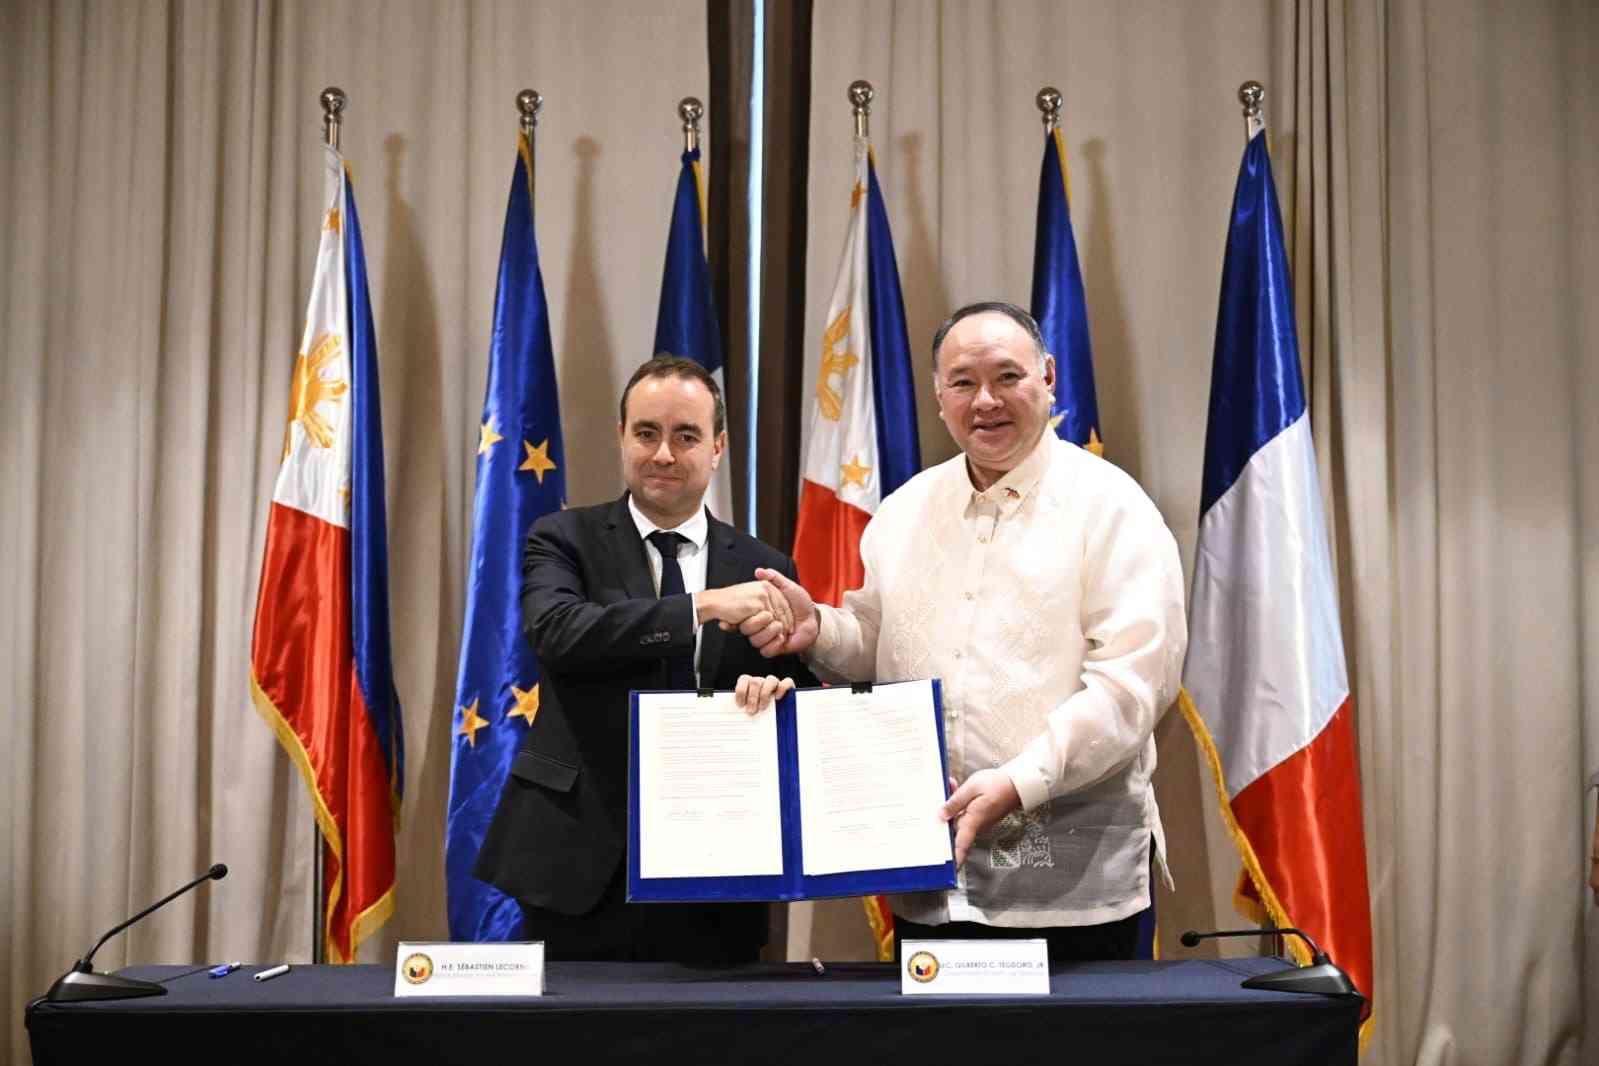 PH and France welcomes “positive trajectory” of defense and military cooperation, including consideration of a visiting forces agreement